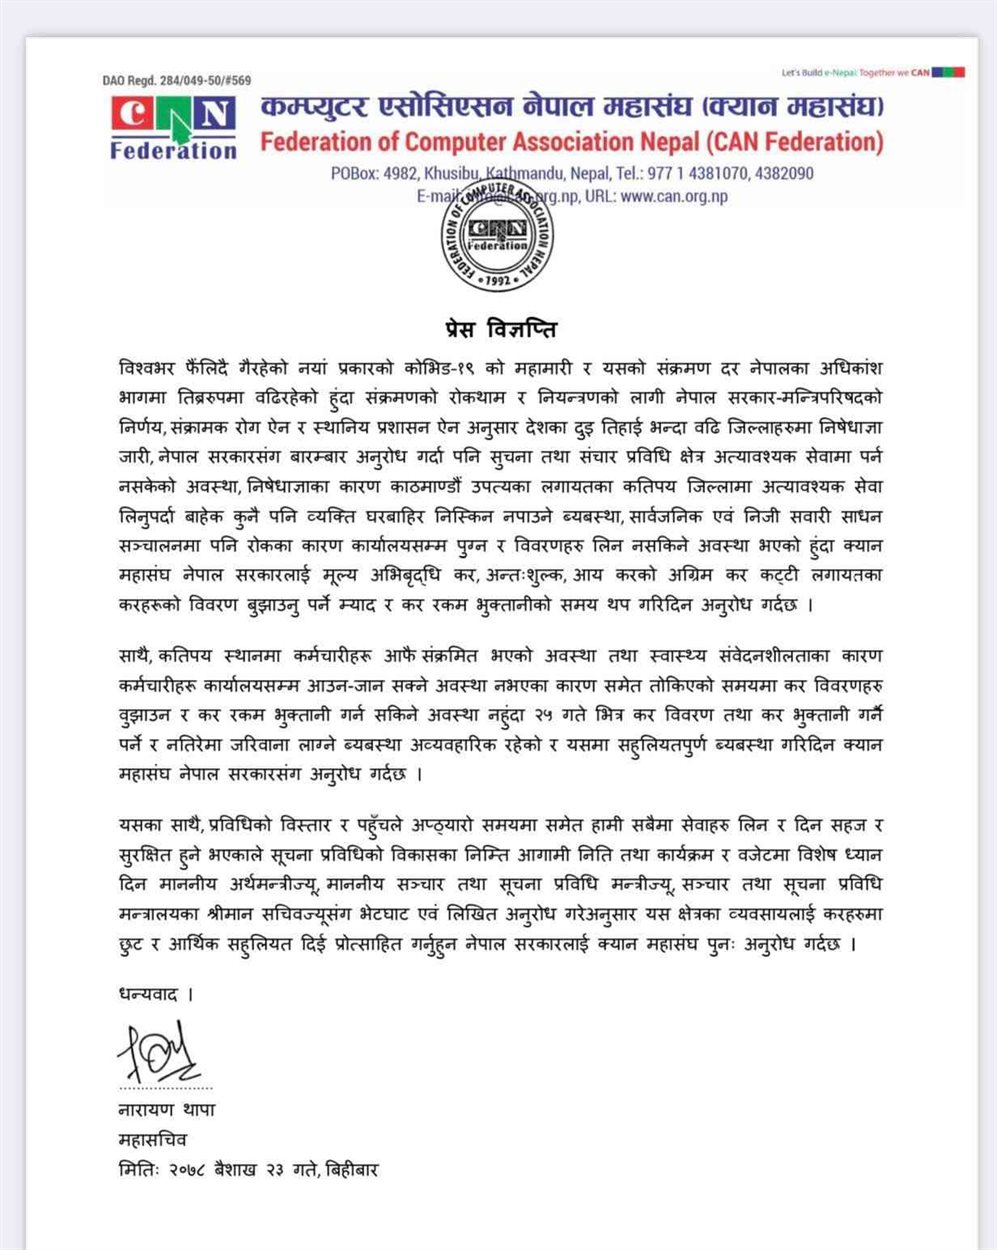 can-federation-press-release